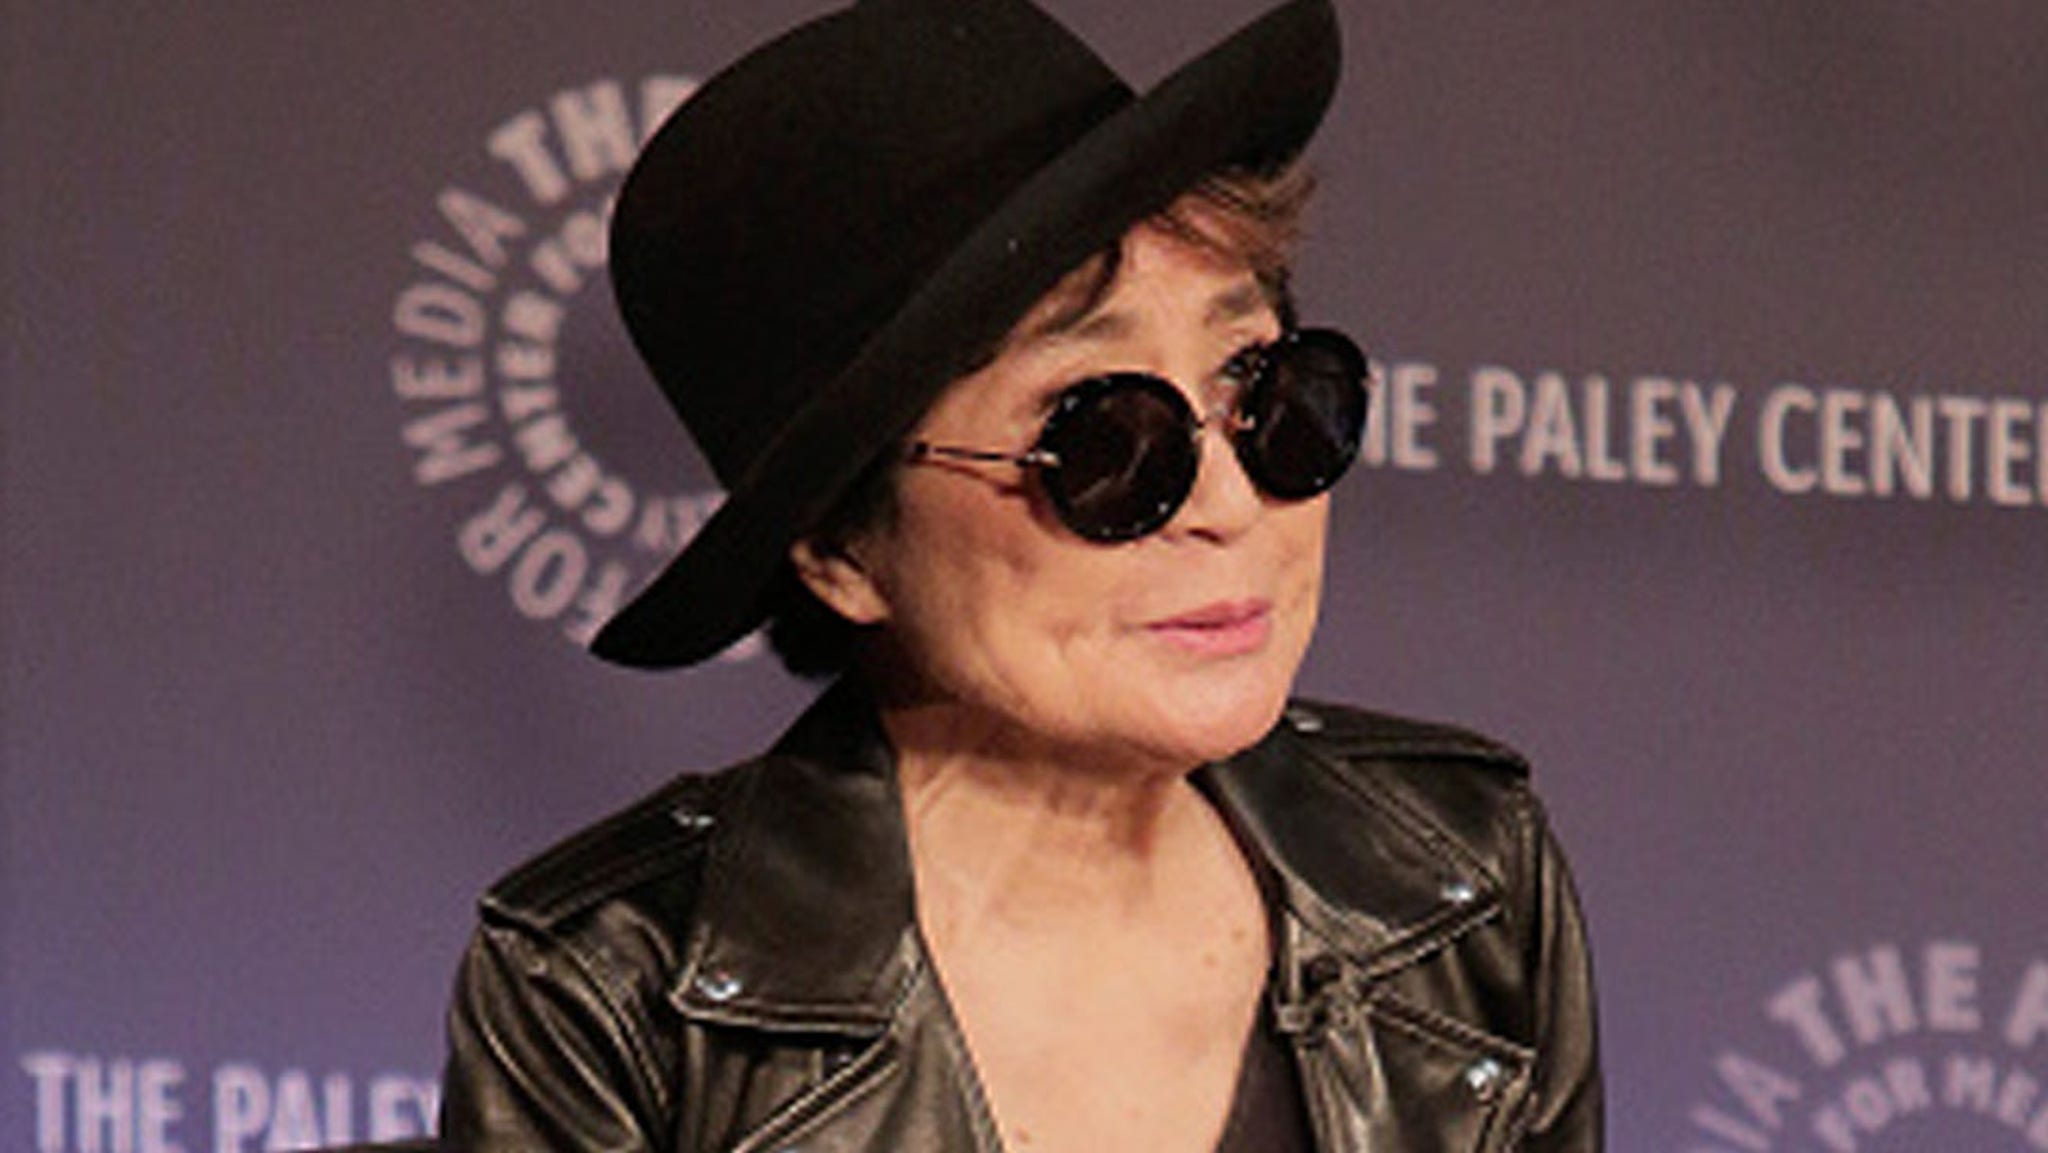 Picture - Yoko Ono Vindicated in Beatles Doc Over Claims She Broke Up Band